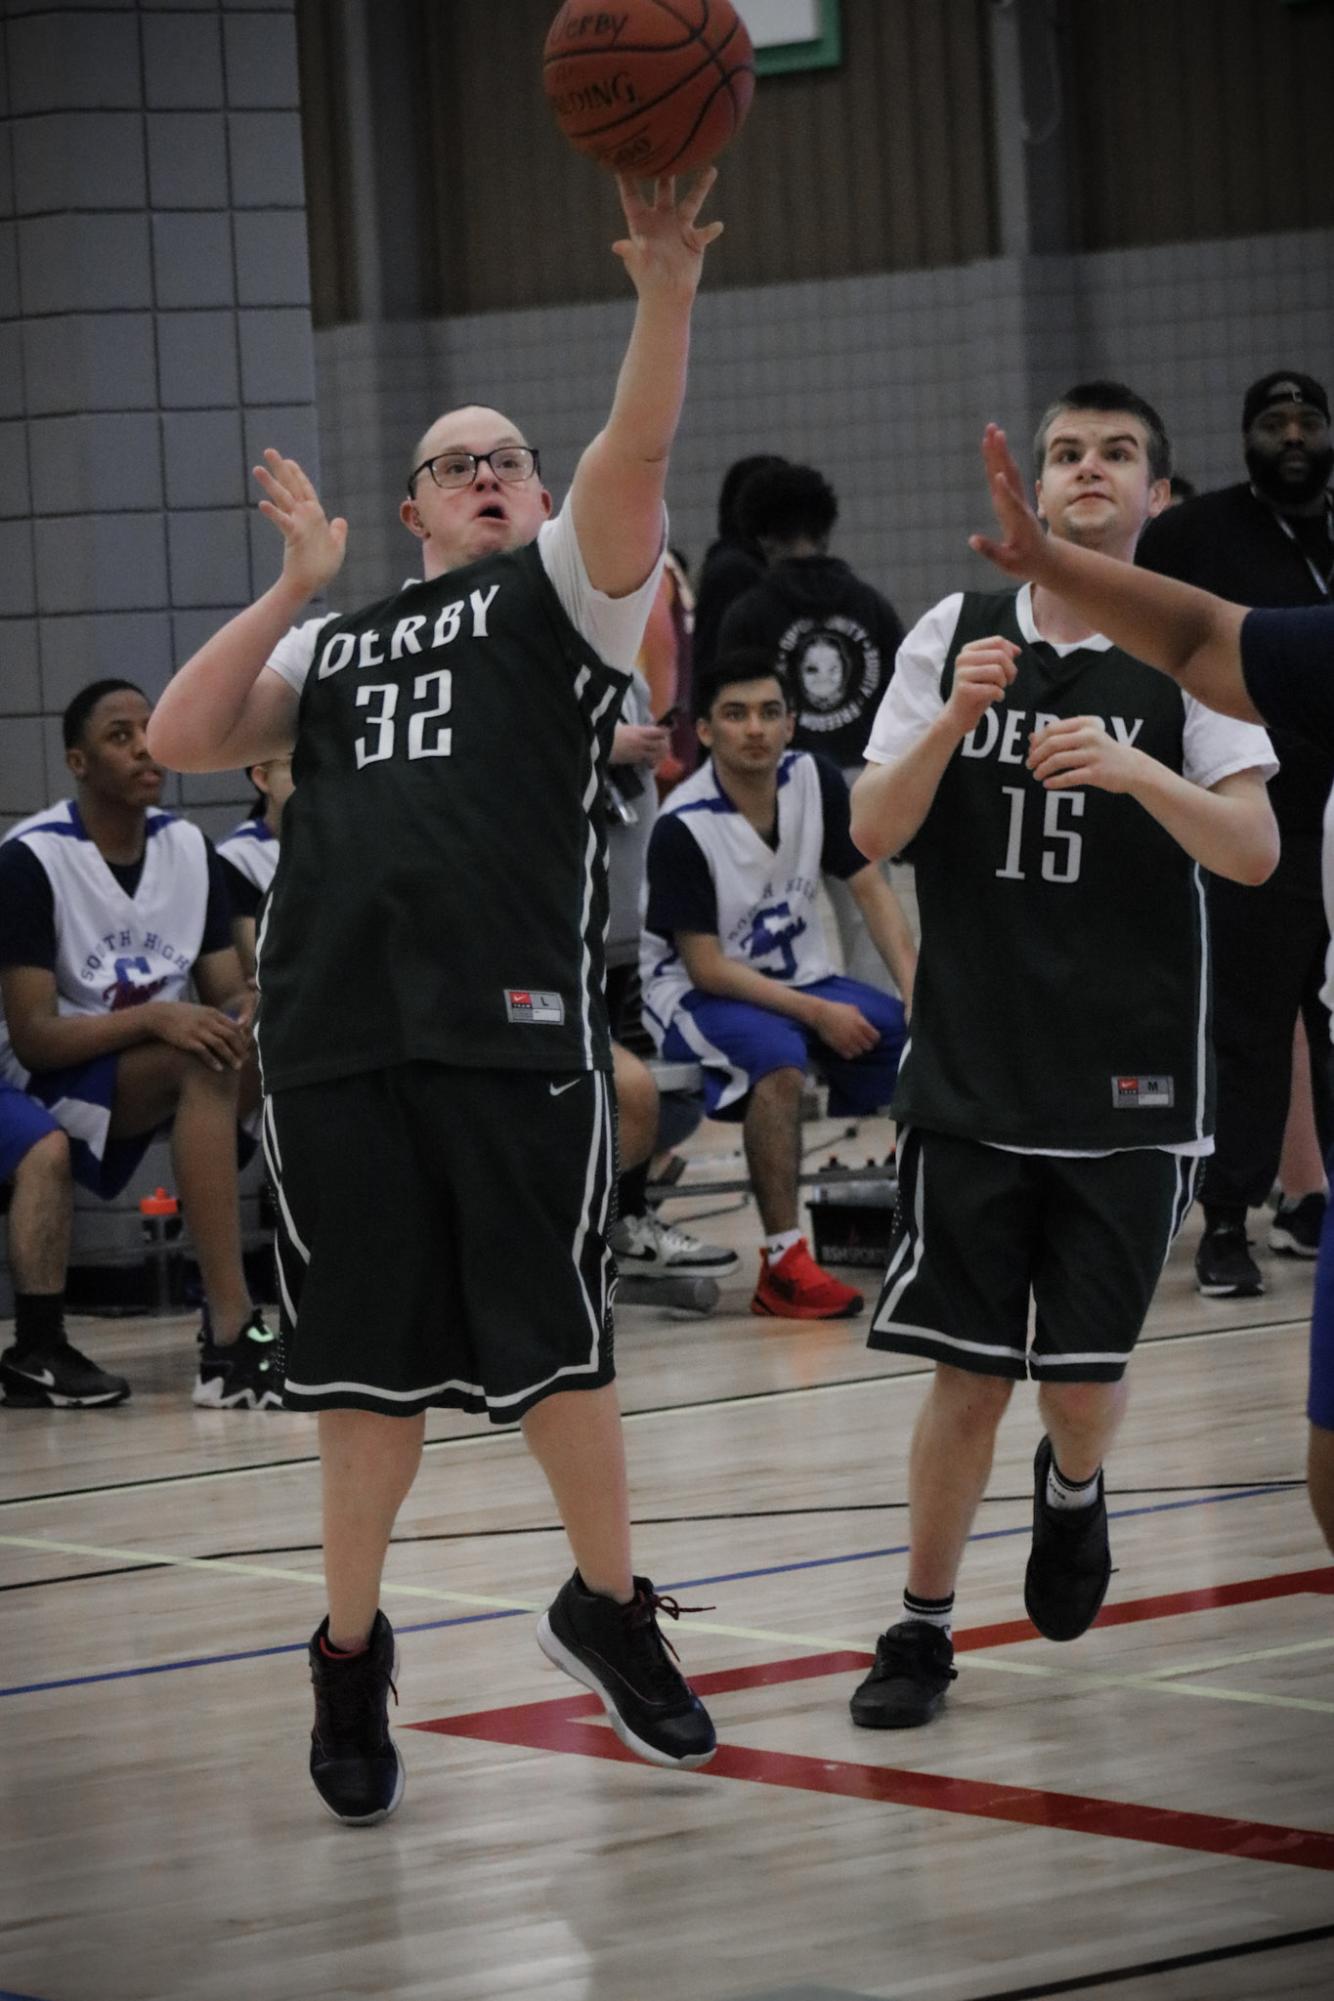 Panther+Pals+Basketball+Tournament+%28Photos+by+Magnolia+LaForge%29